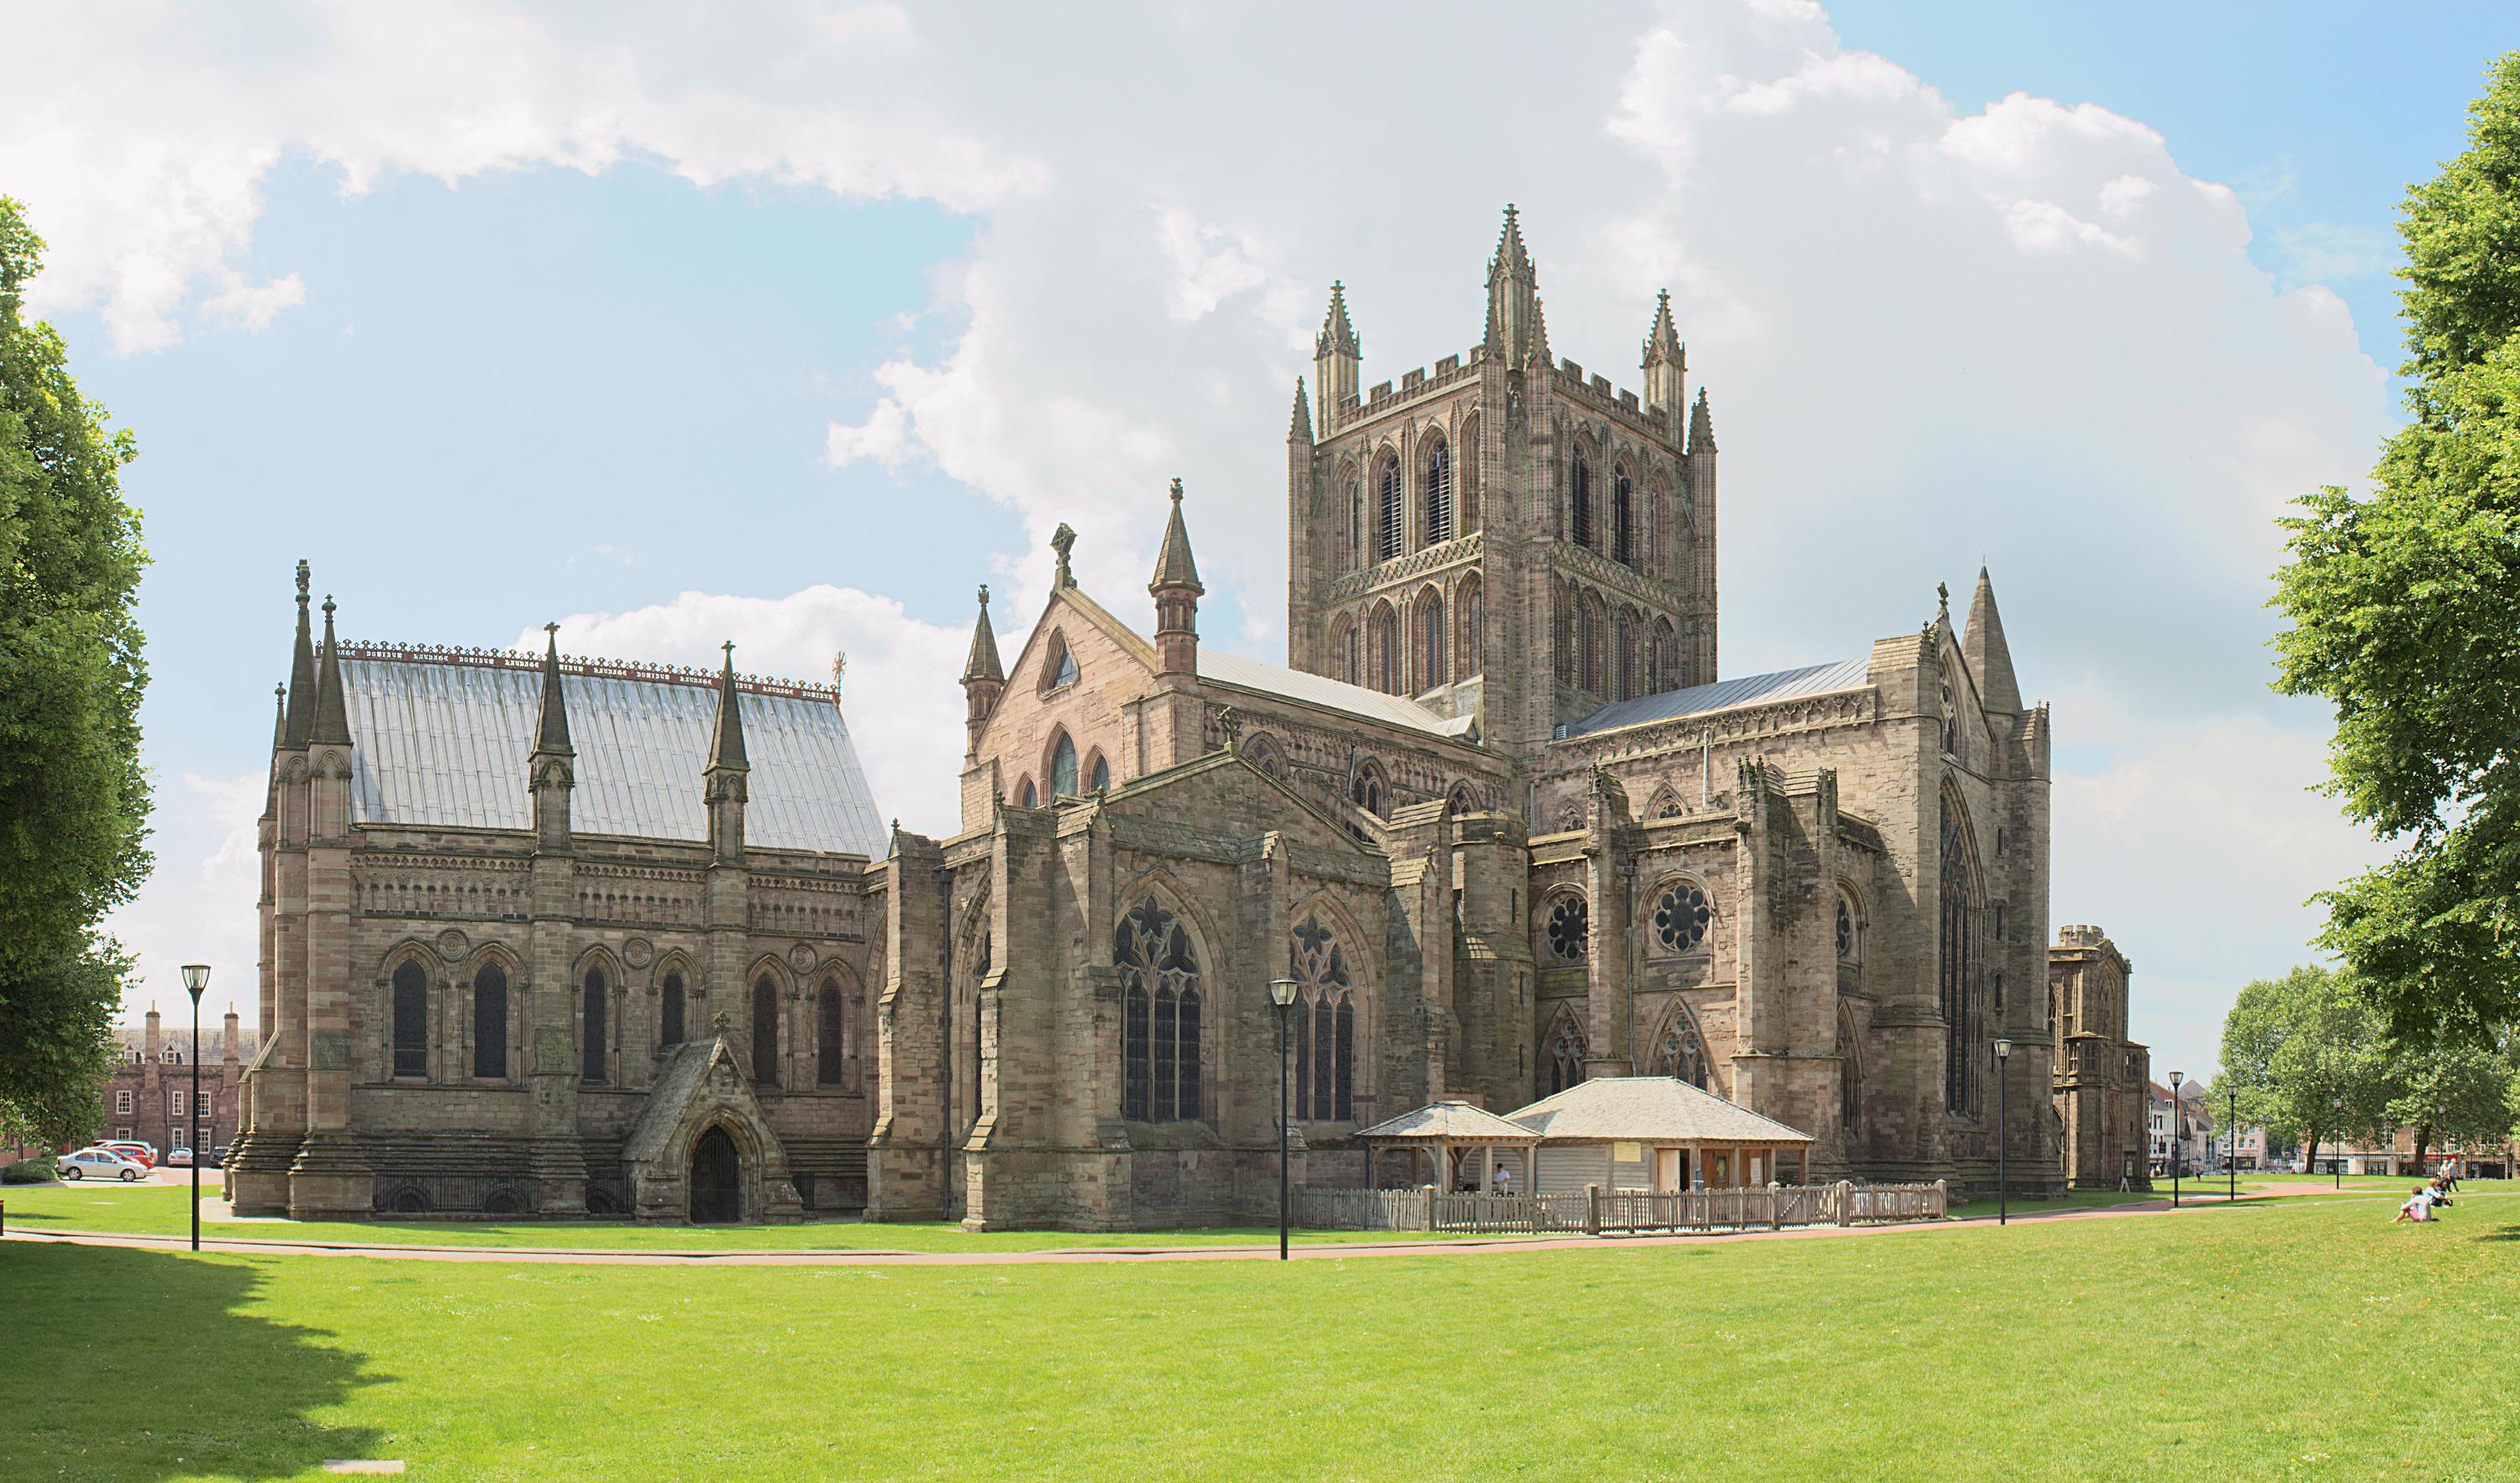 HerefordshireHEREFORDHerefordCathedral(celuiciCC-BY-SA3.0)1